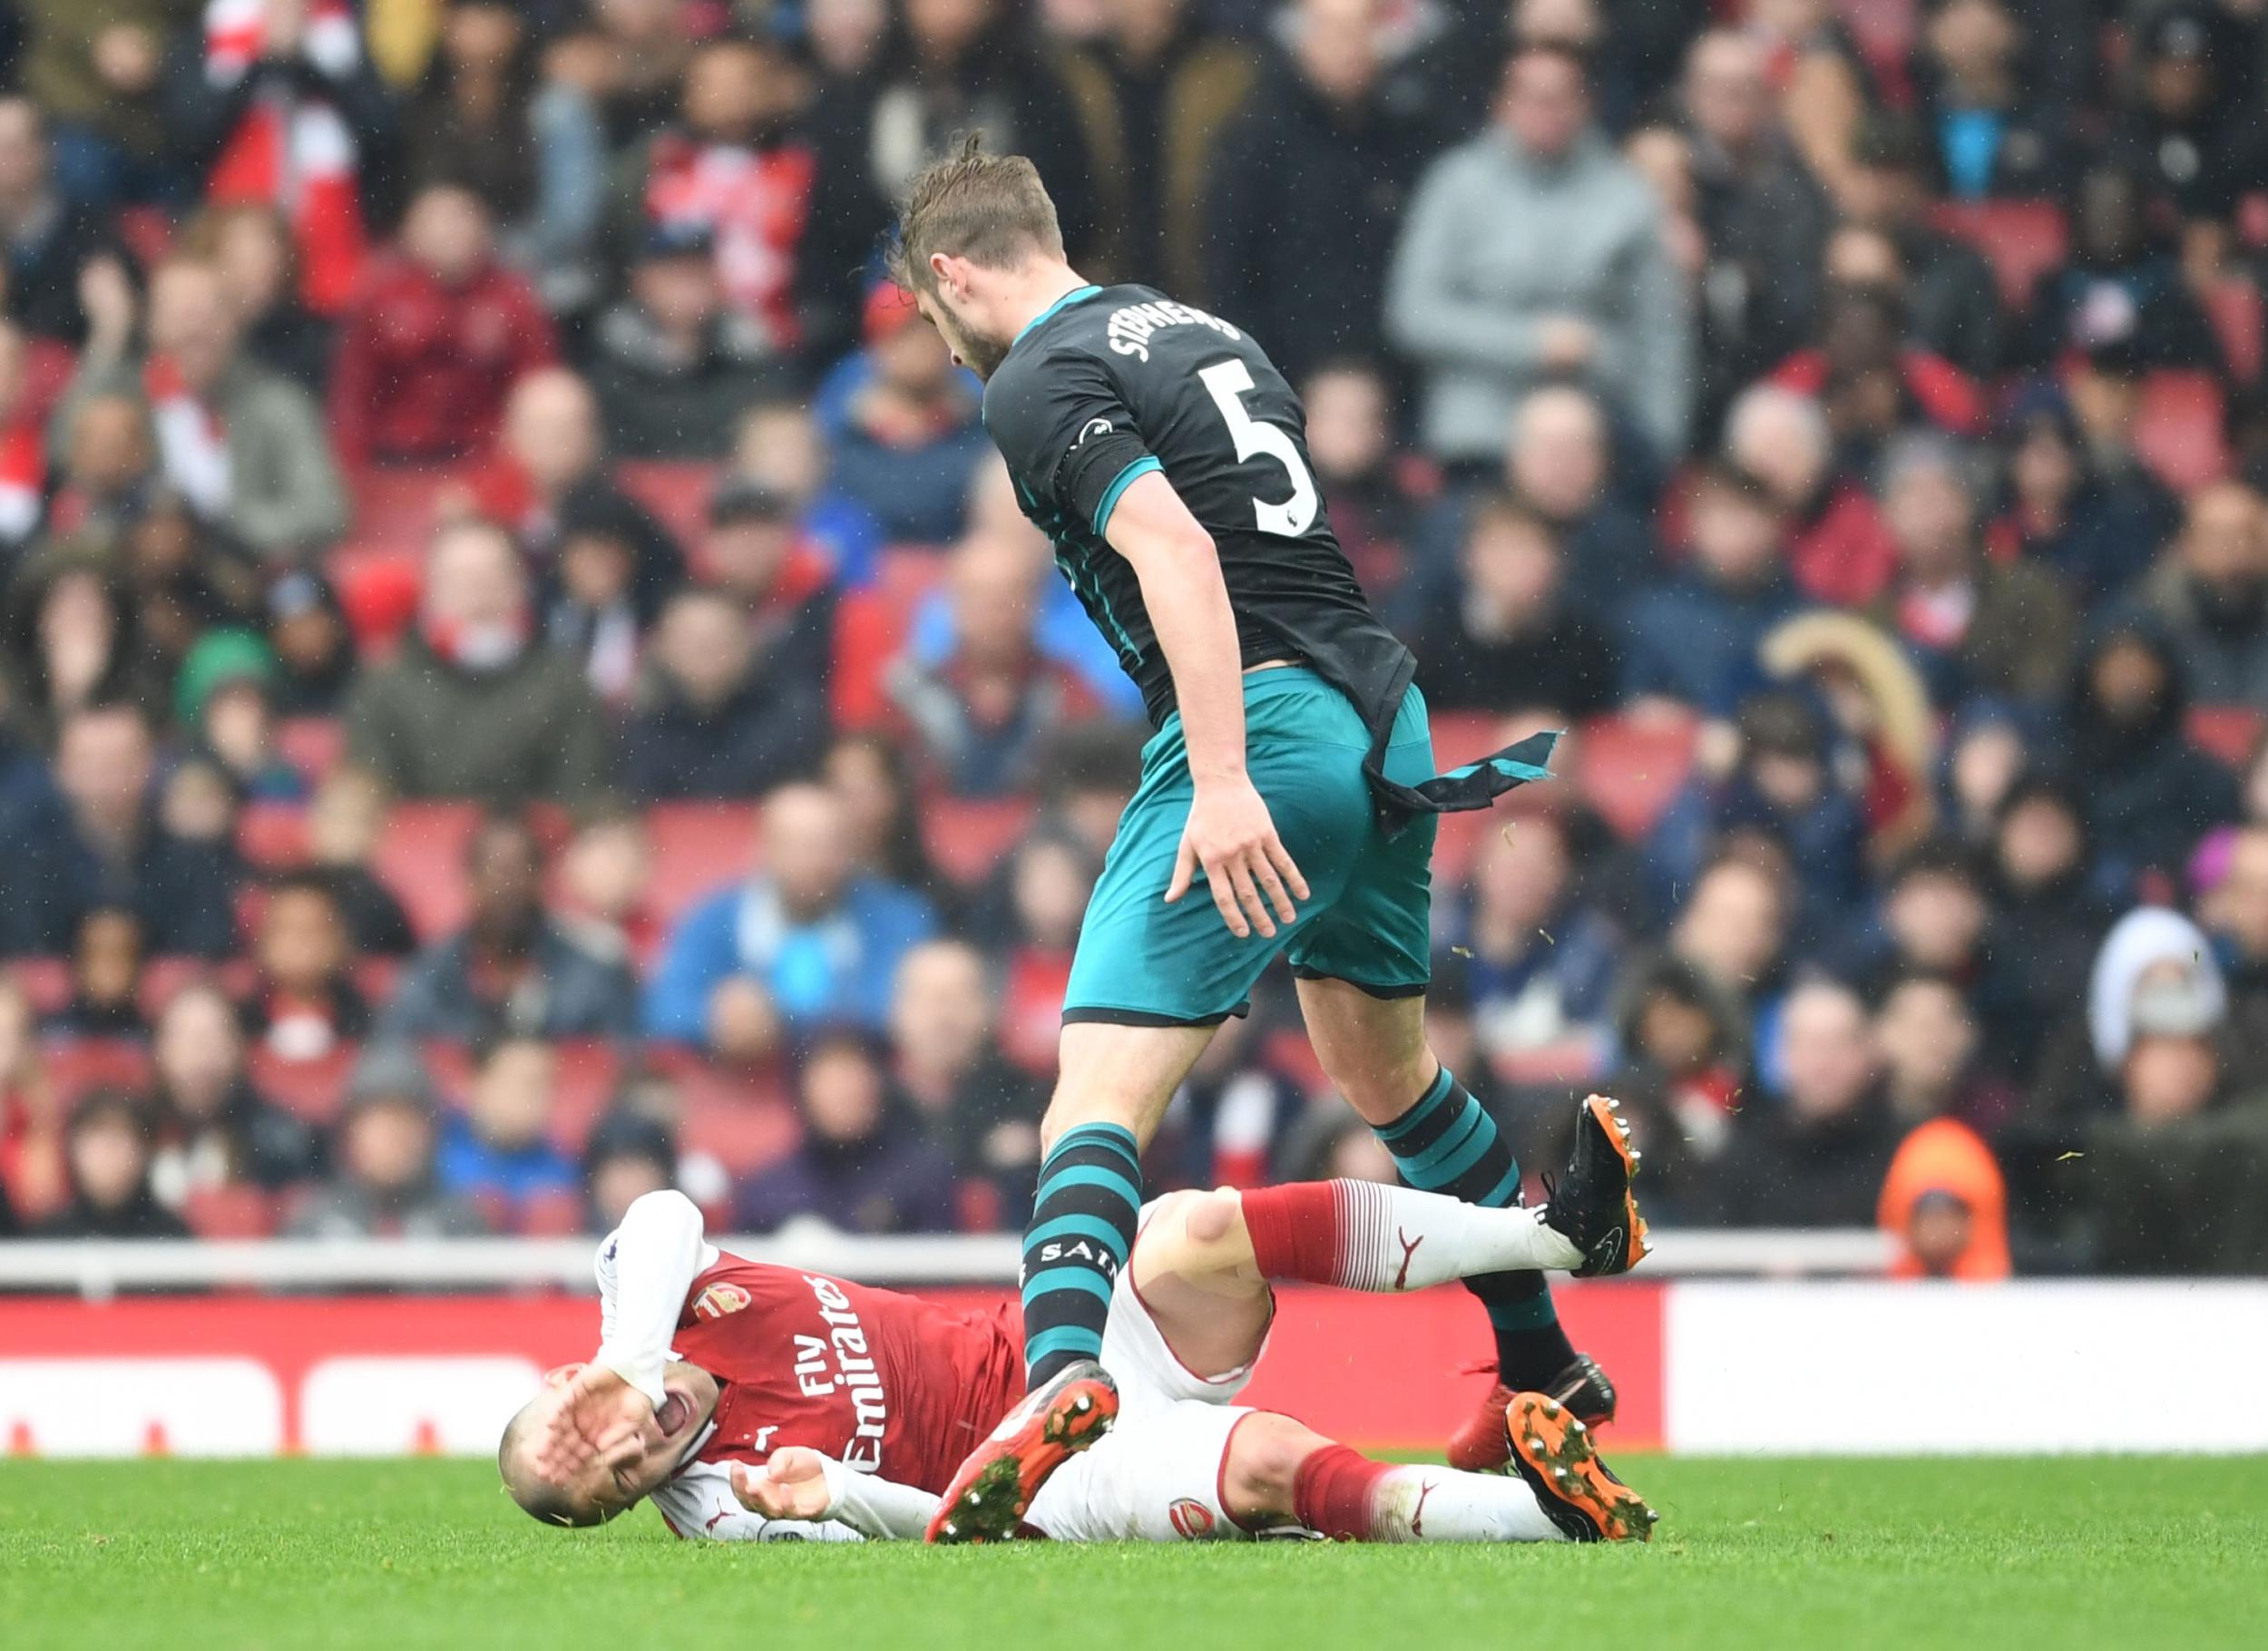 Jack Stephens was sent off in the incident with Jack Wilshere